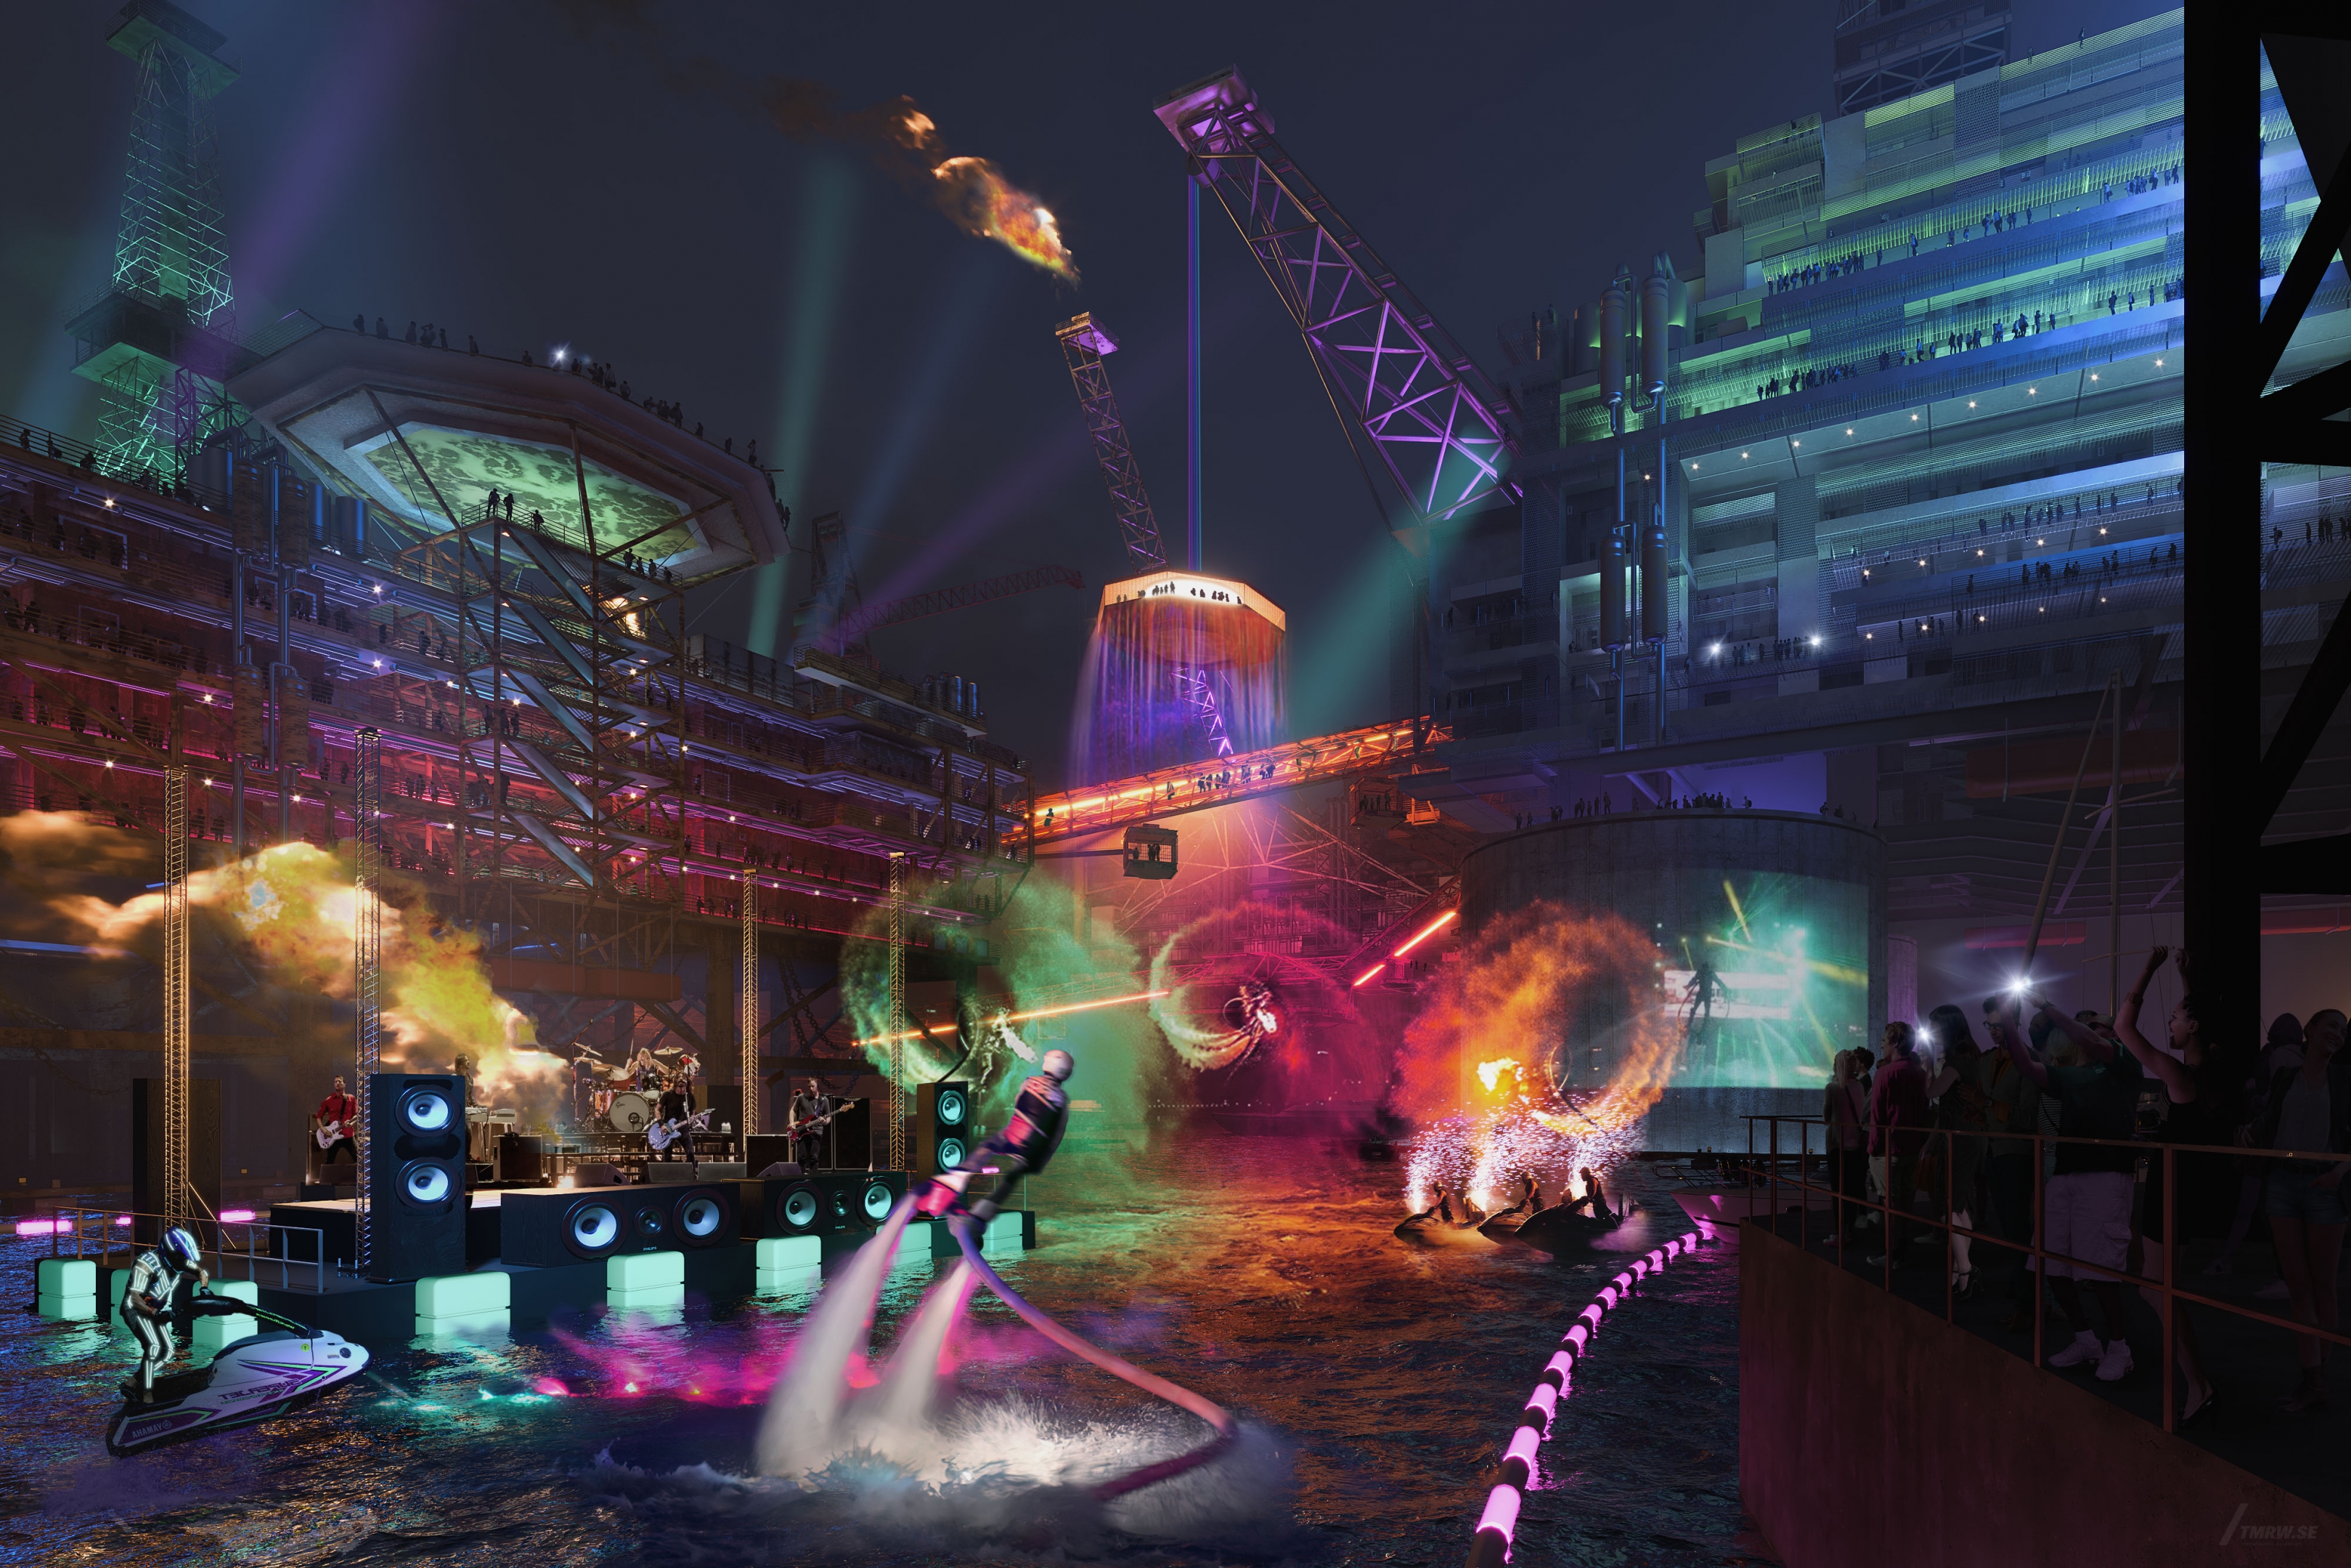 Architectural visualization of Hitch for HKS. An image of a water show on a stage at night from street view.